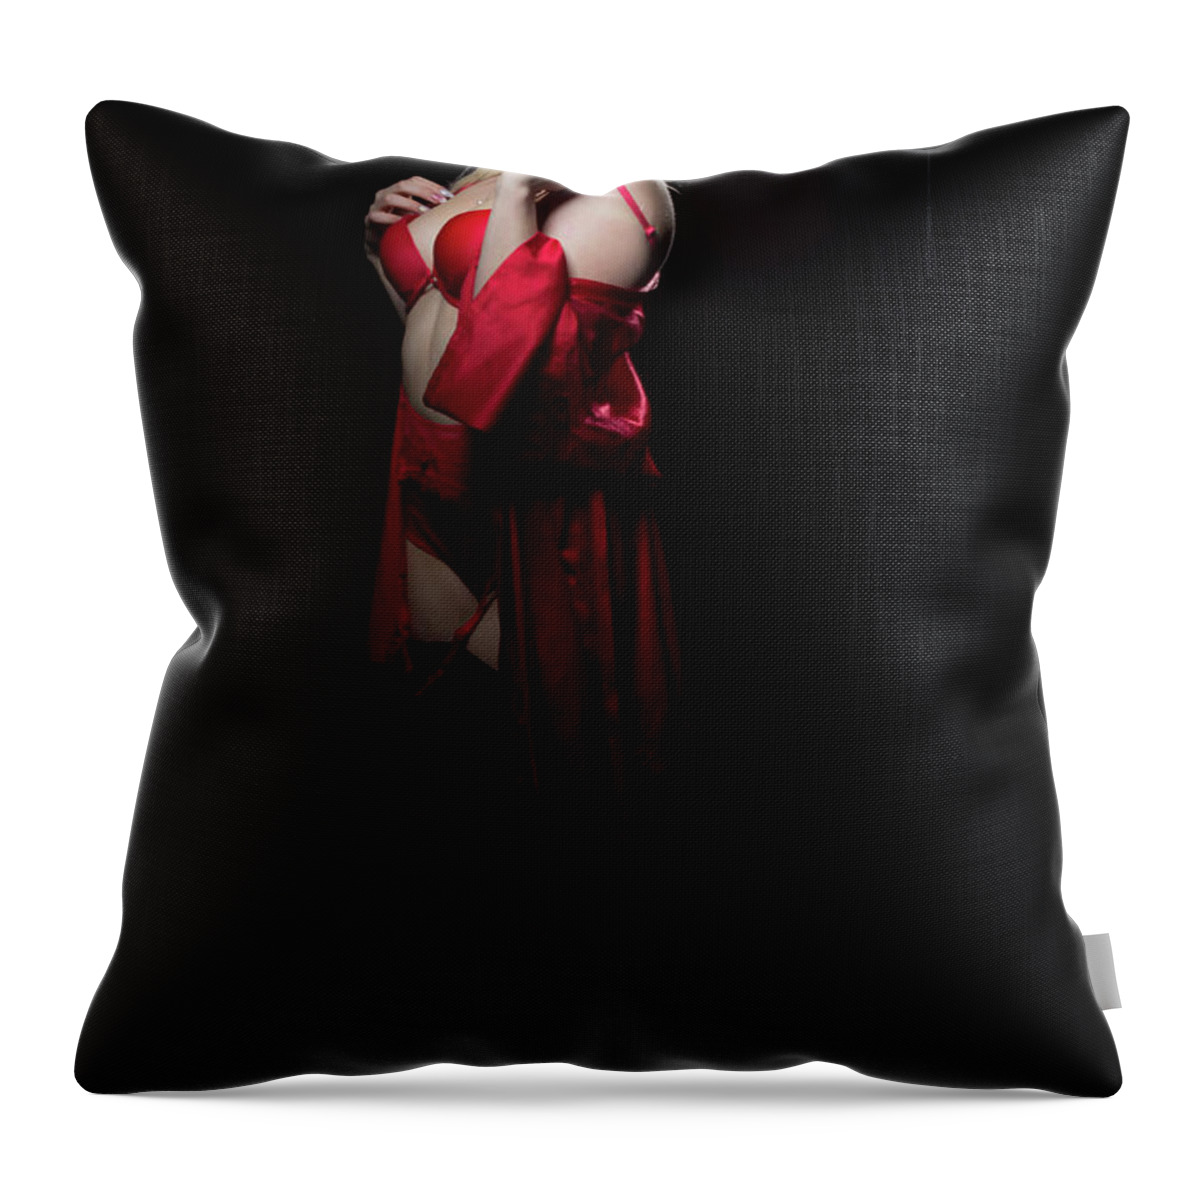 Sexy Throw Pillow featuring the photograph Red Lingerie by La Bella Vita Boudoir